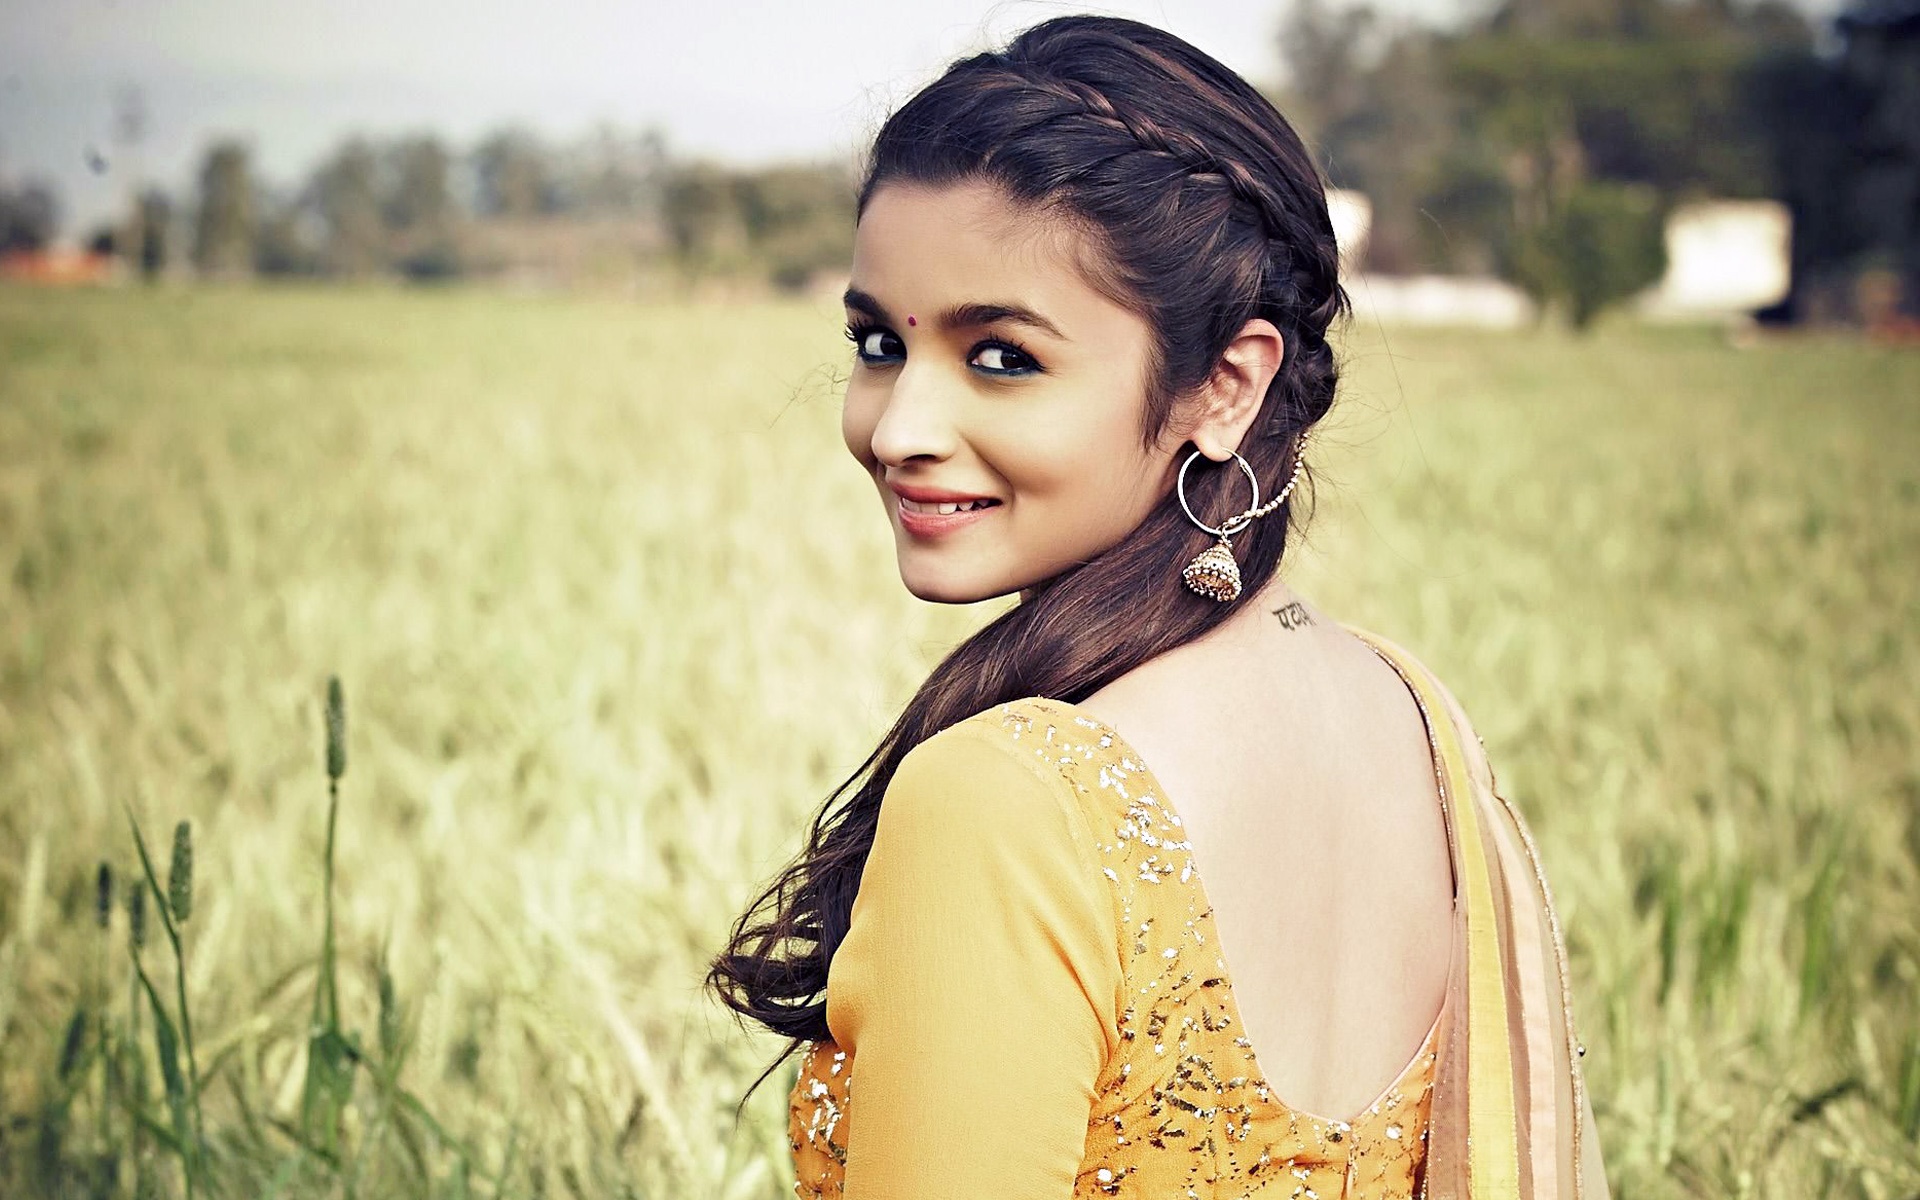 Alia Bhatt wallpapers for desktop, download free Alia Bhatt pictures and  backgrounds for PC 